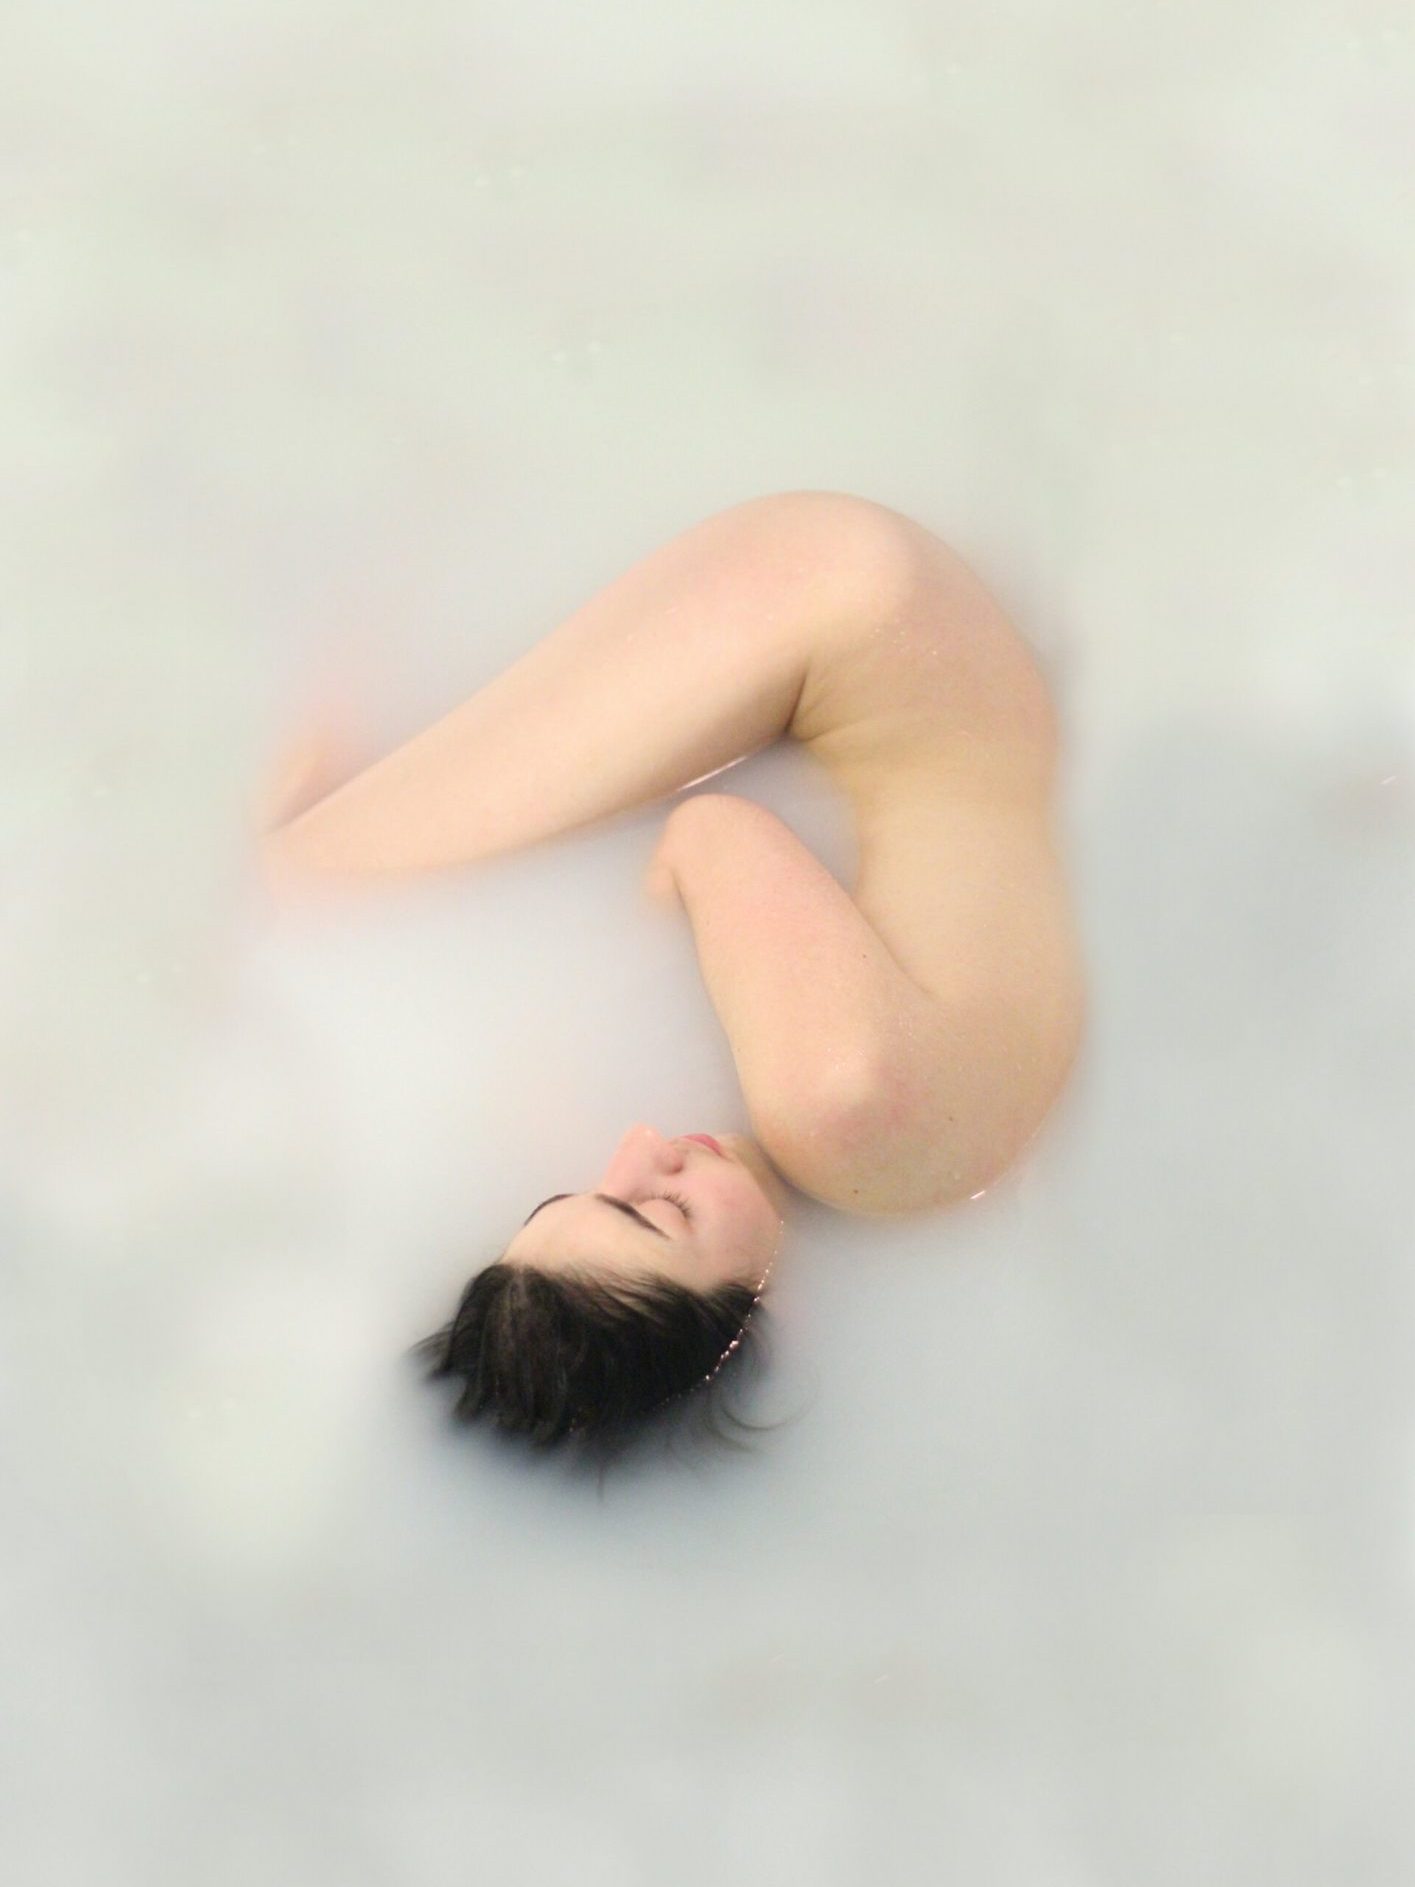 A person is submerged in milky water, resting in a fetal position with only their face and knees emerging from the surface.